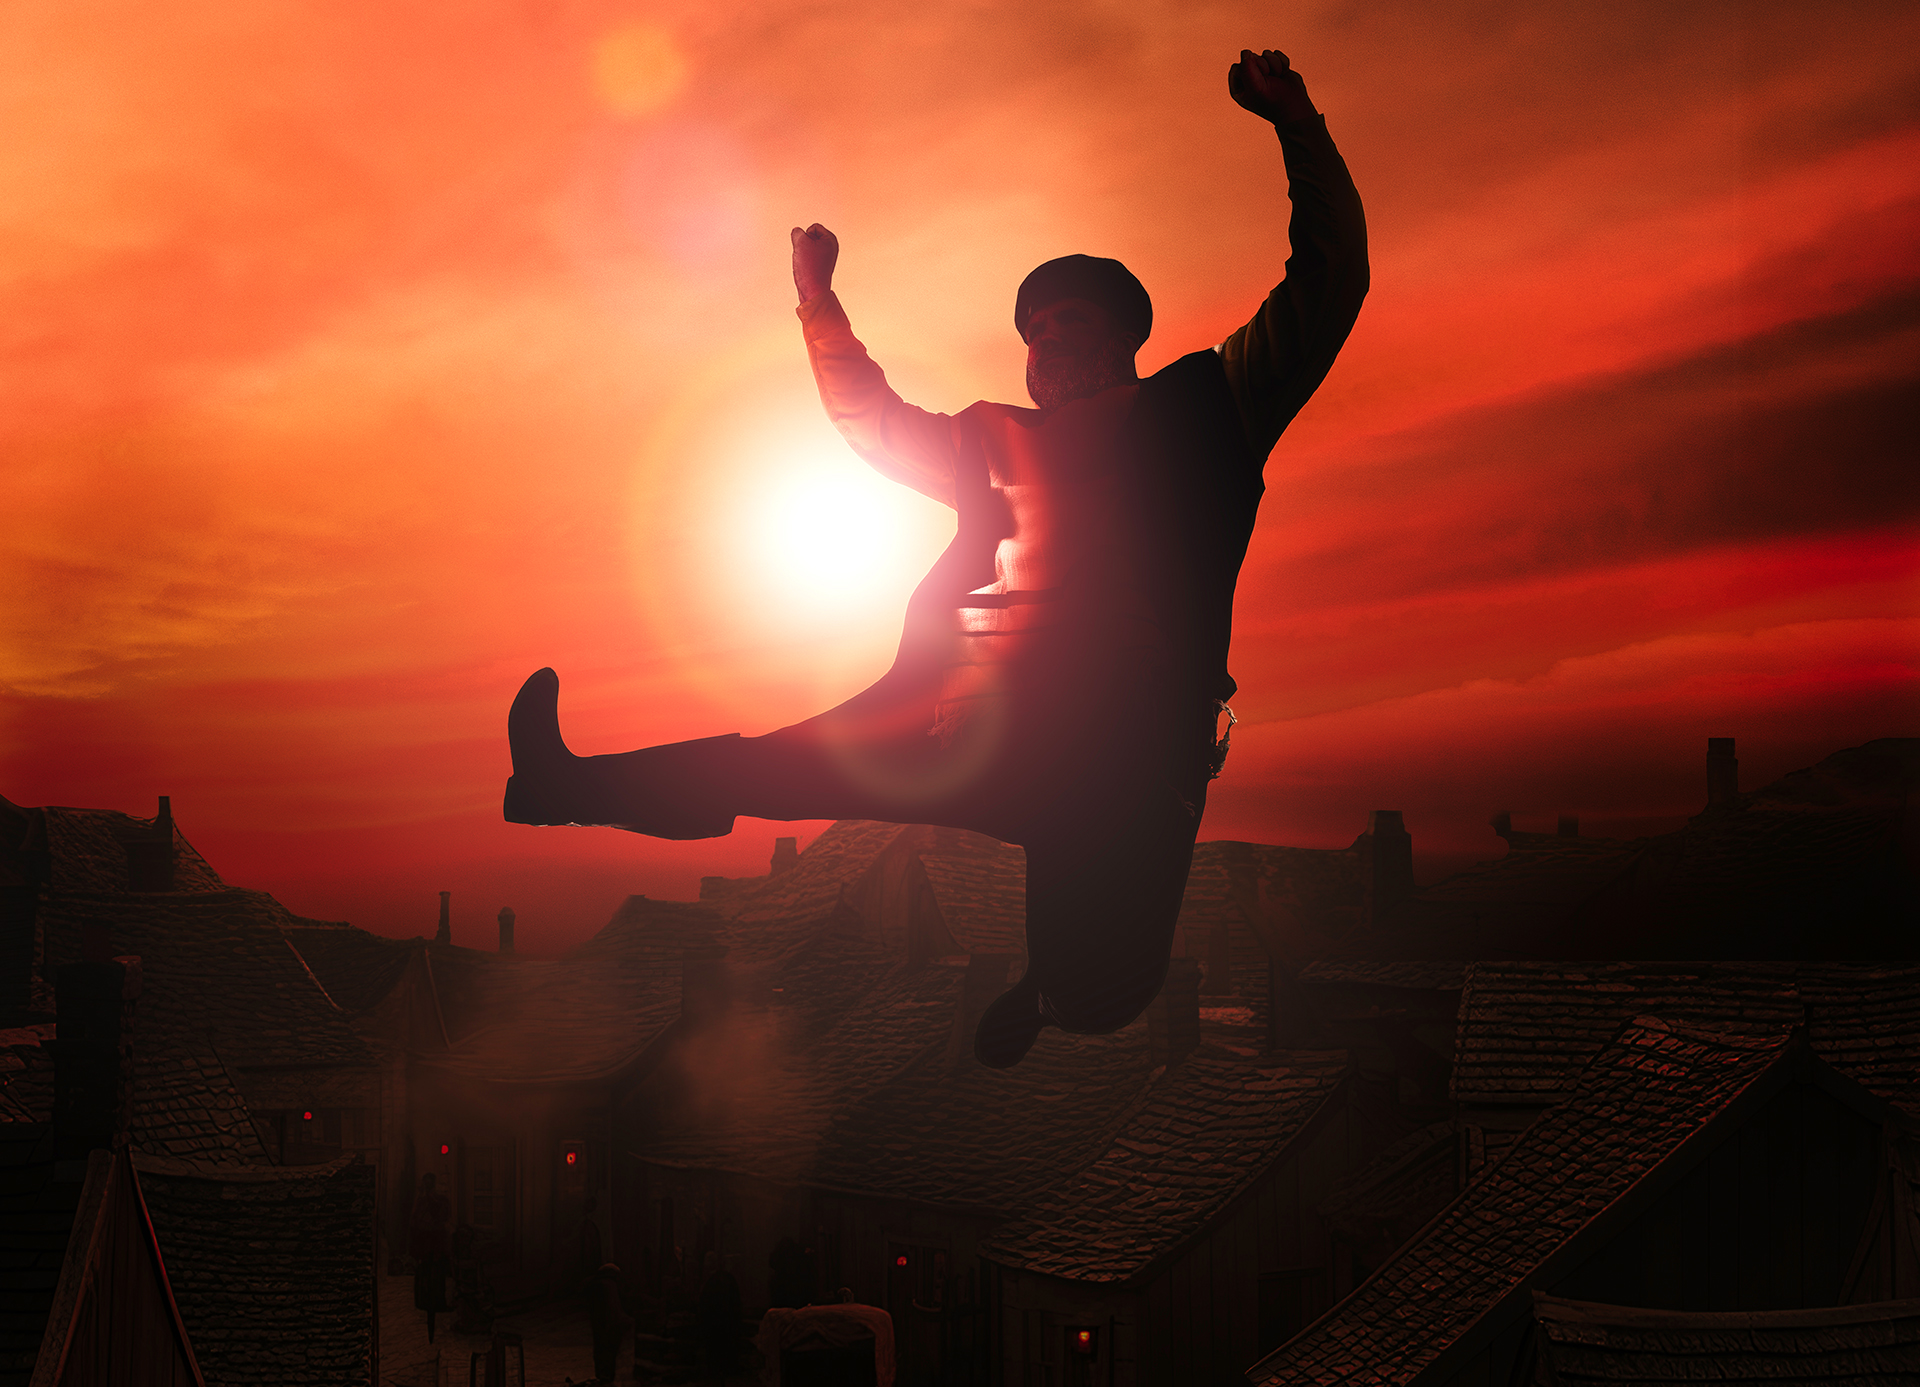 A man in shadow leaps for joy in a small Russian village at sunset.